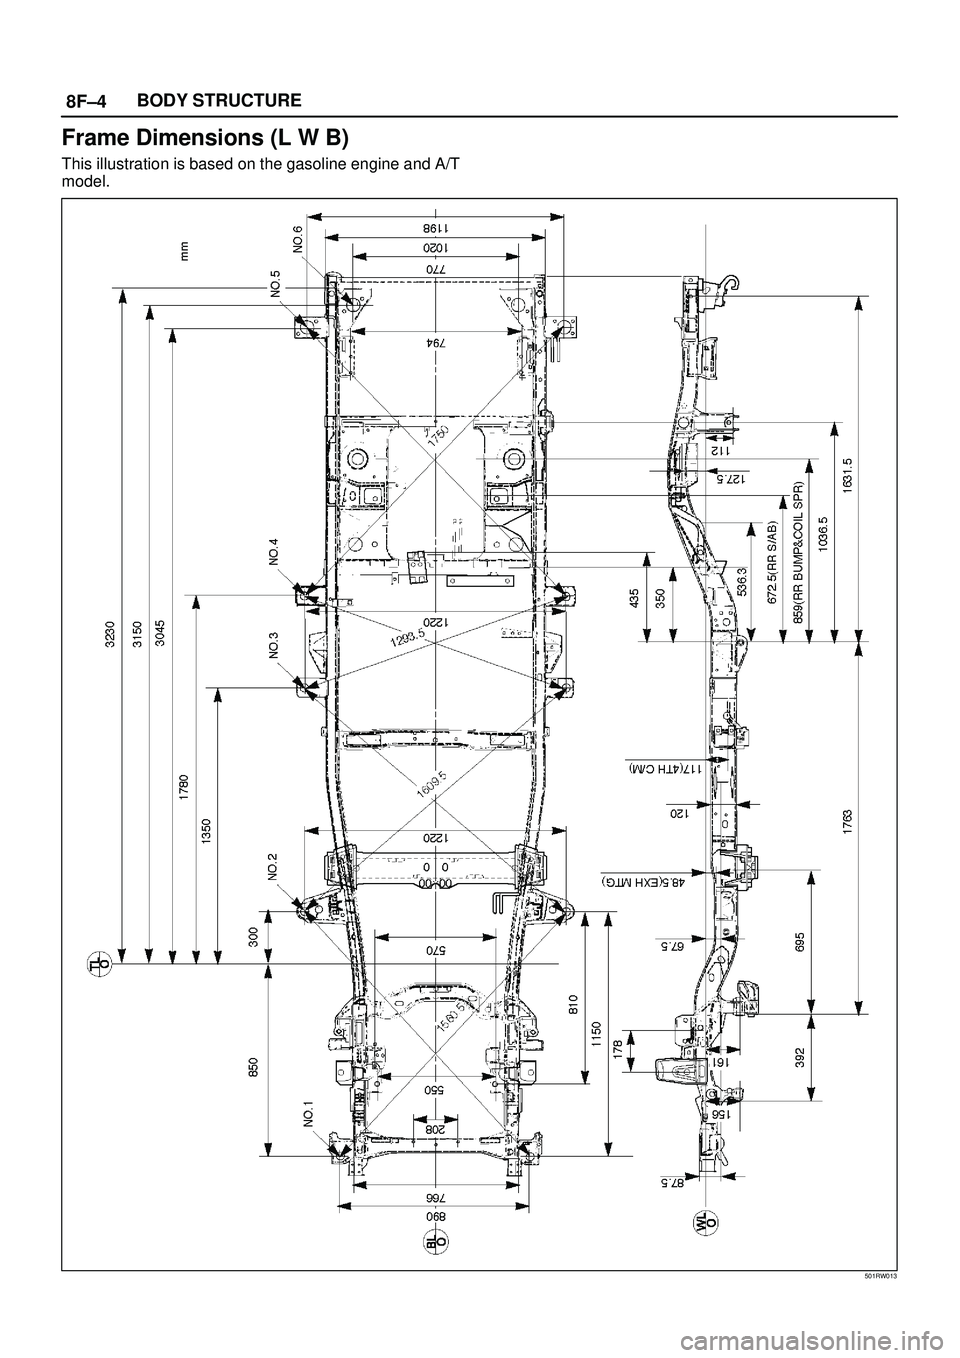 ISUZU TROOPER 1998  Service Repair Manual 8F±4BODY STRUCTURE
Frame Dimensions (L W B)
This illustration is based on the gasoline engine and A/T
model.
501RW013 